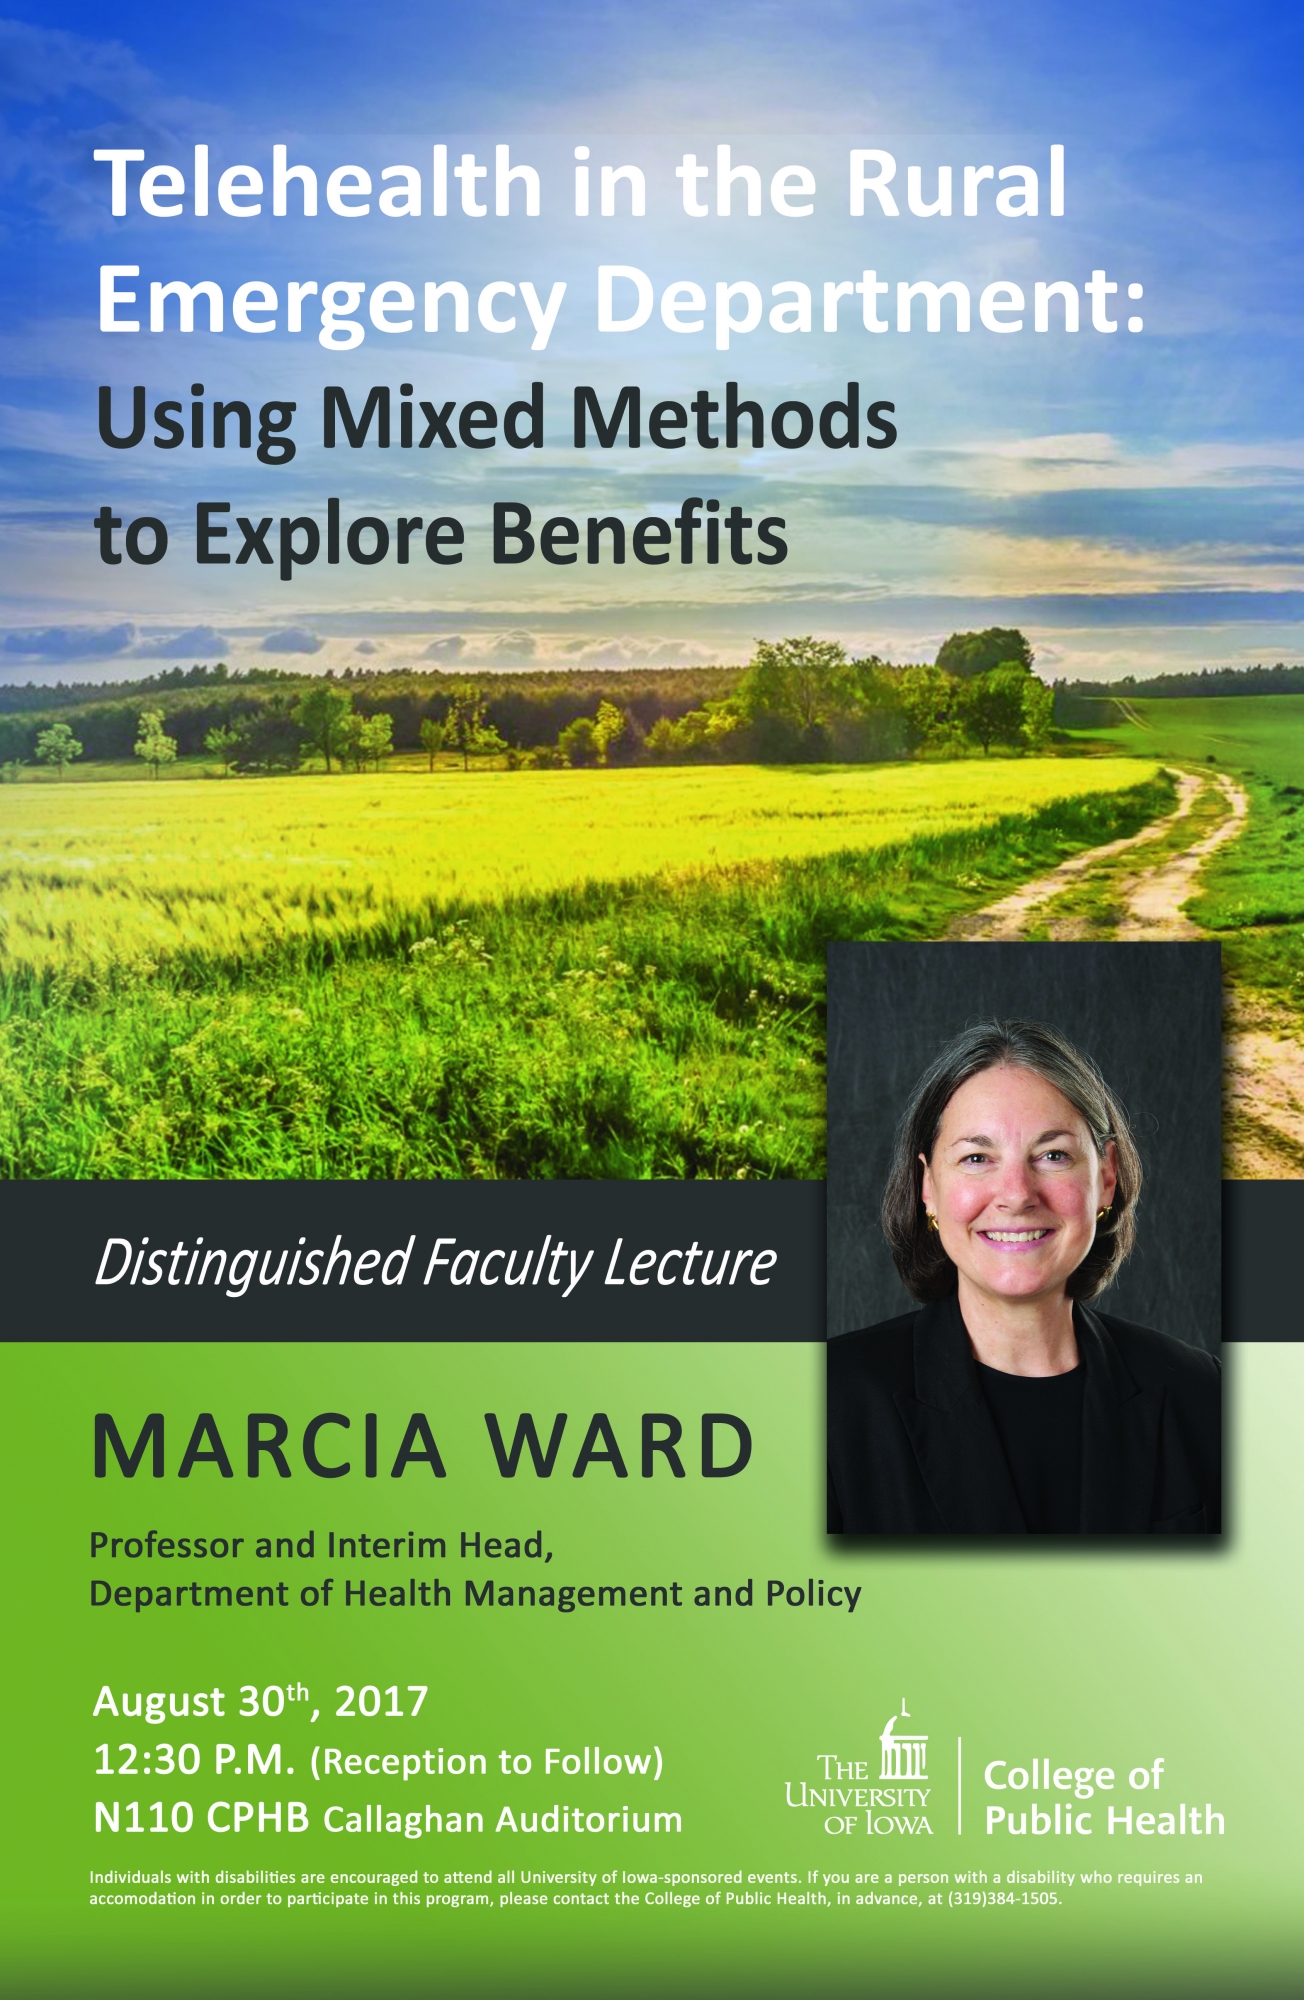 Distinguished Faculty Lecture; Marcia Ward; August 30, 2017; Telehealth in the Rural Emergency Department